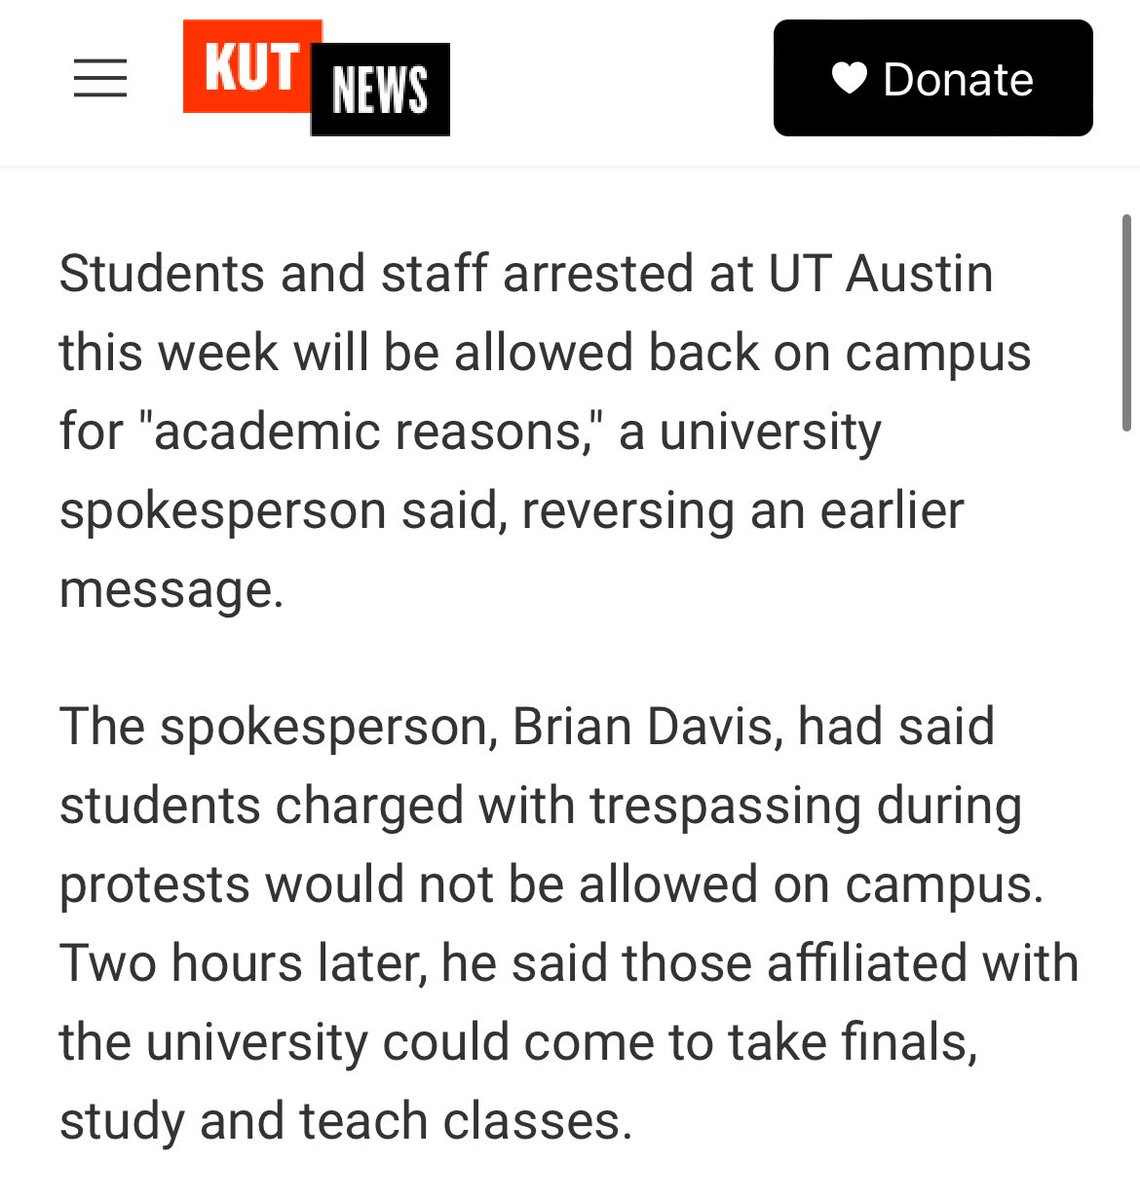 No mention in the below tweet from @UTAustin about why news reports would be “suggesting” that students’ access to campus may have changed if they were arrested. A UT spokesperson said students charged with trespassing would not be allowed back on campus, @KUT writes.